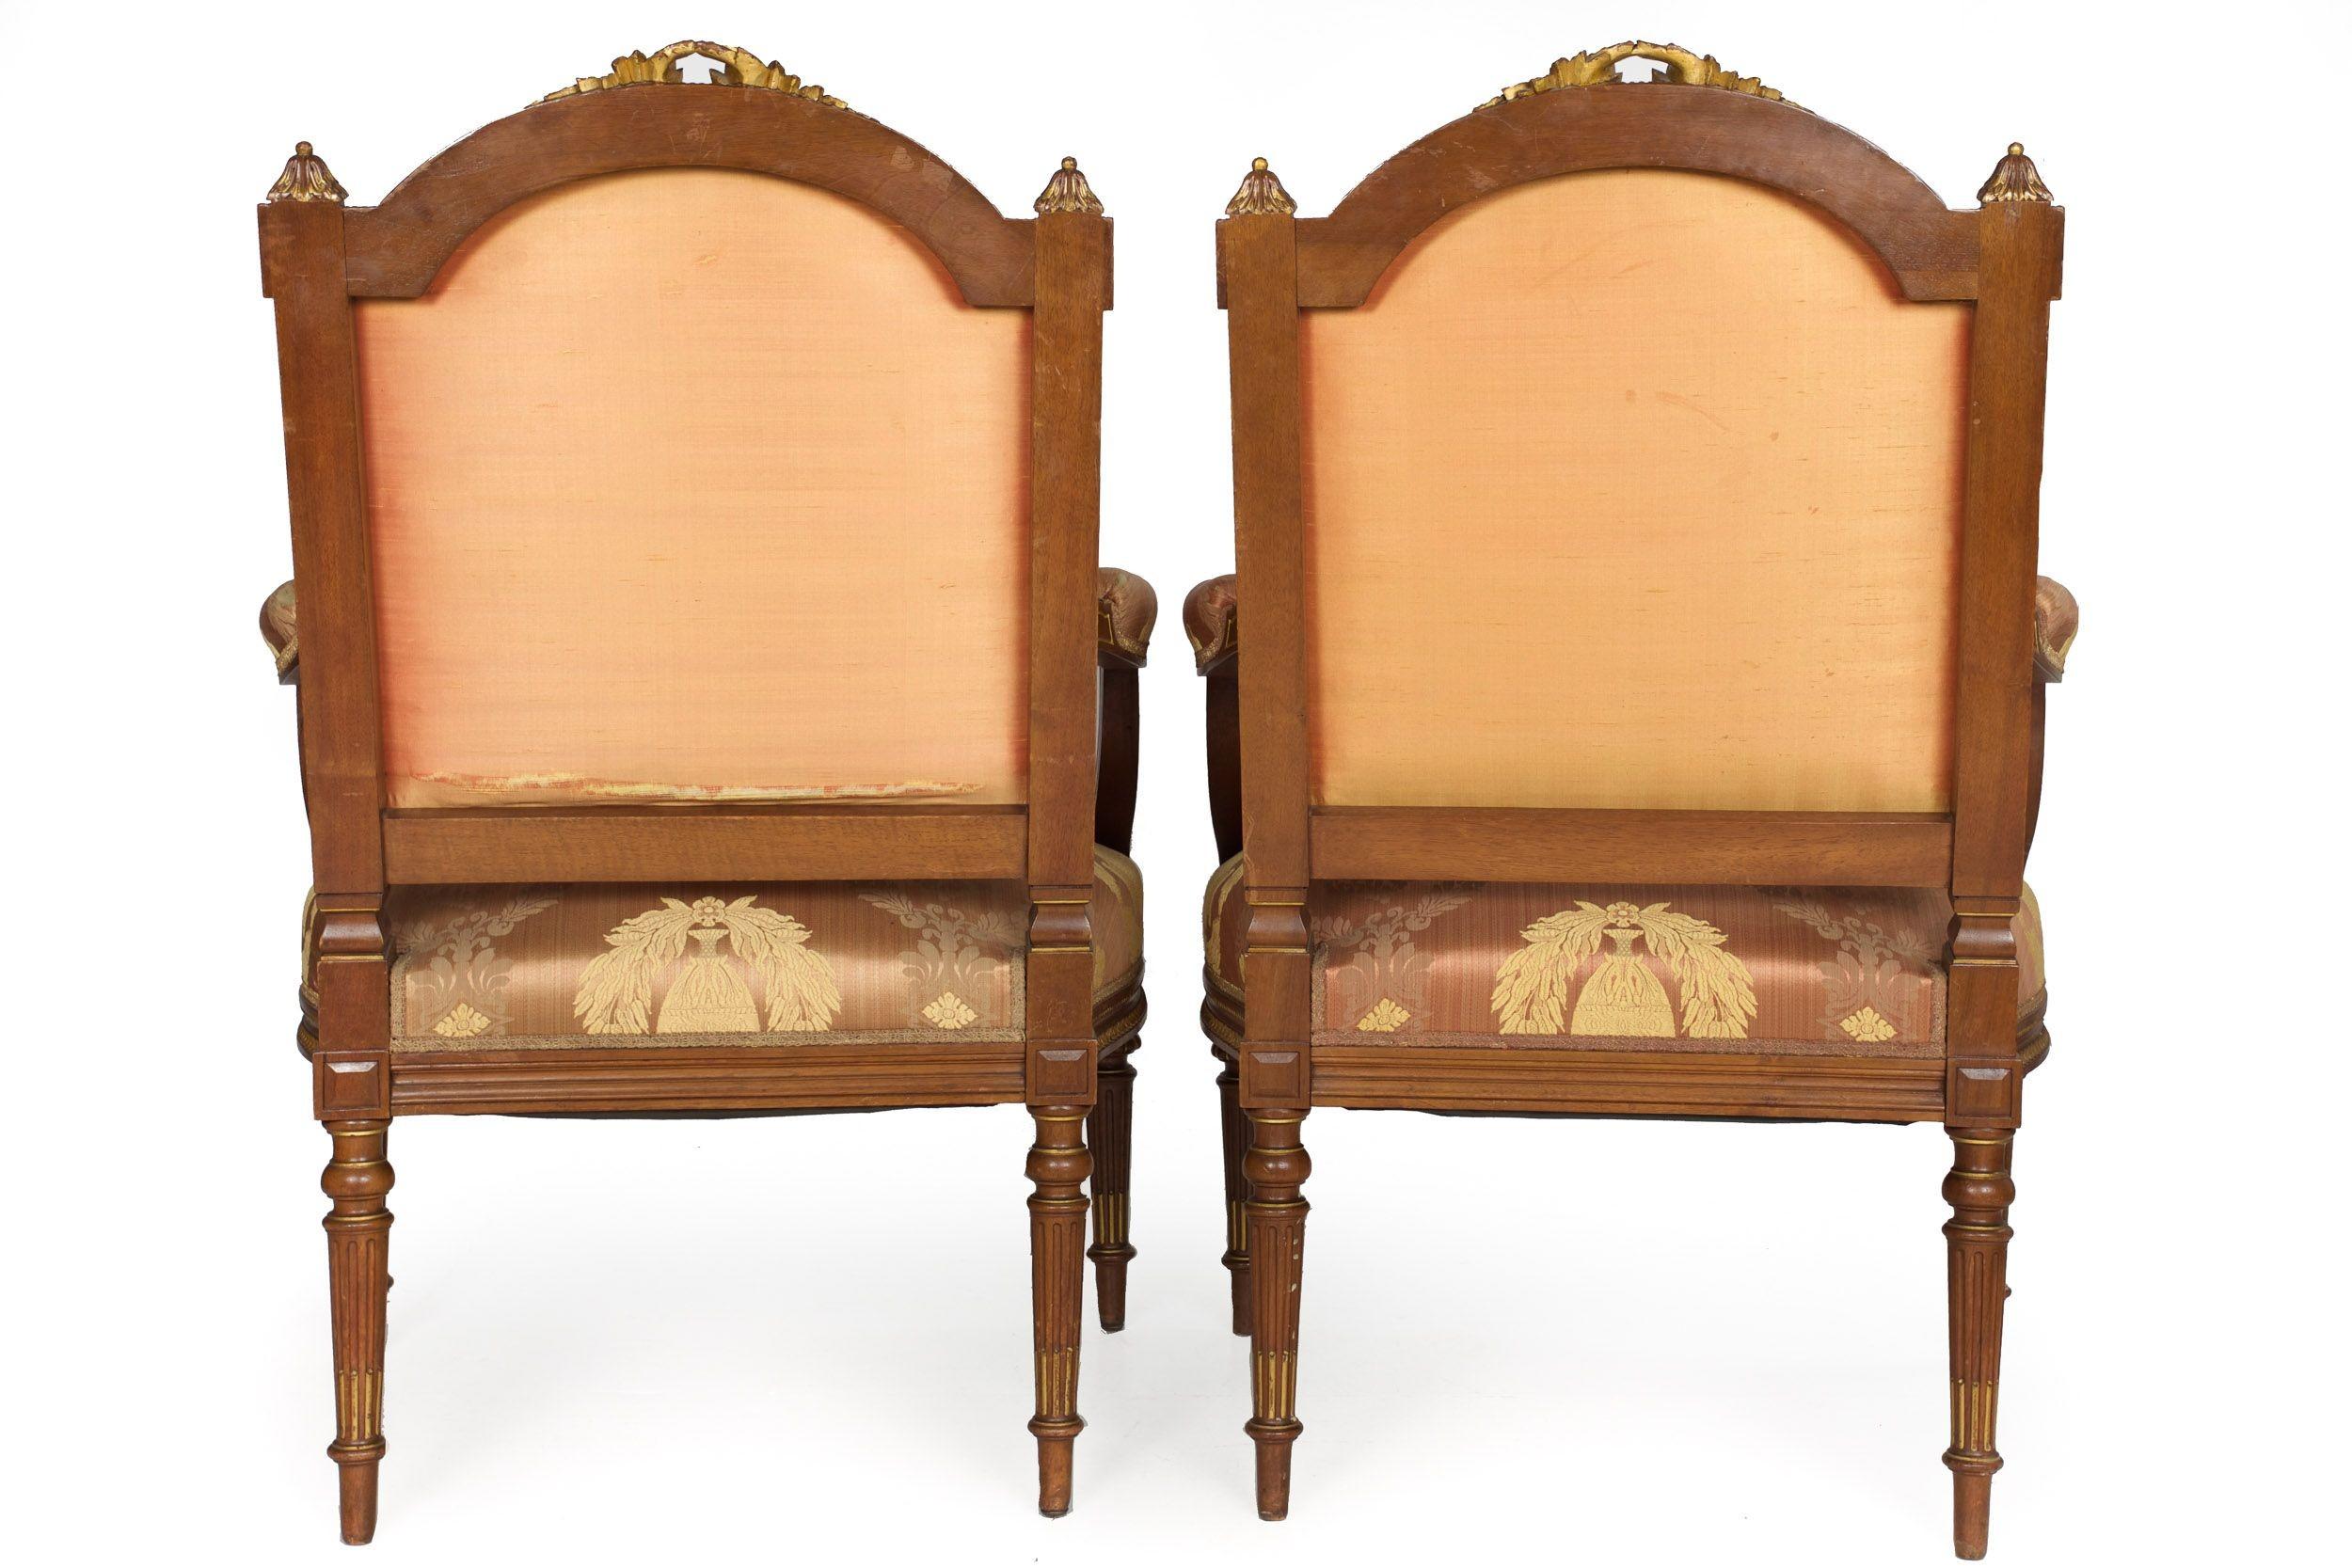 20th Century French Louis XVI Style Carved Walnut Antique Arm Chairs